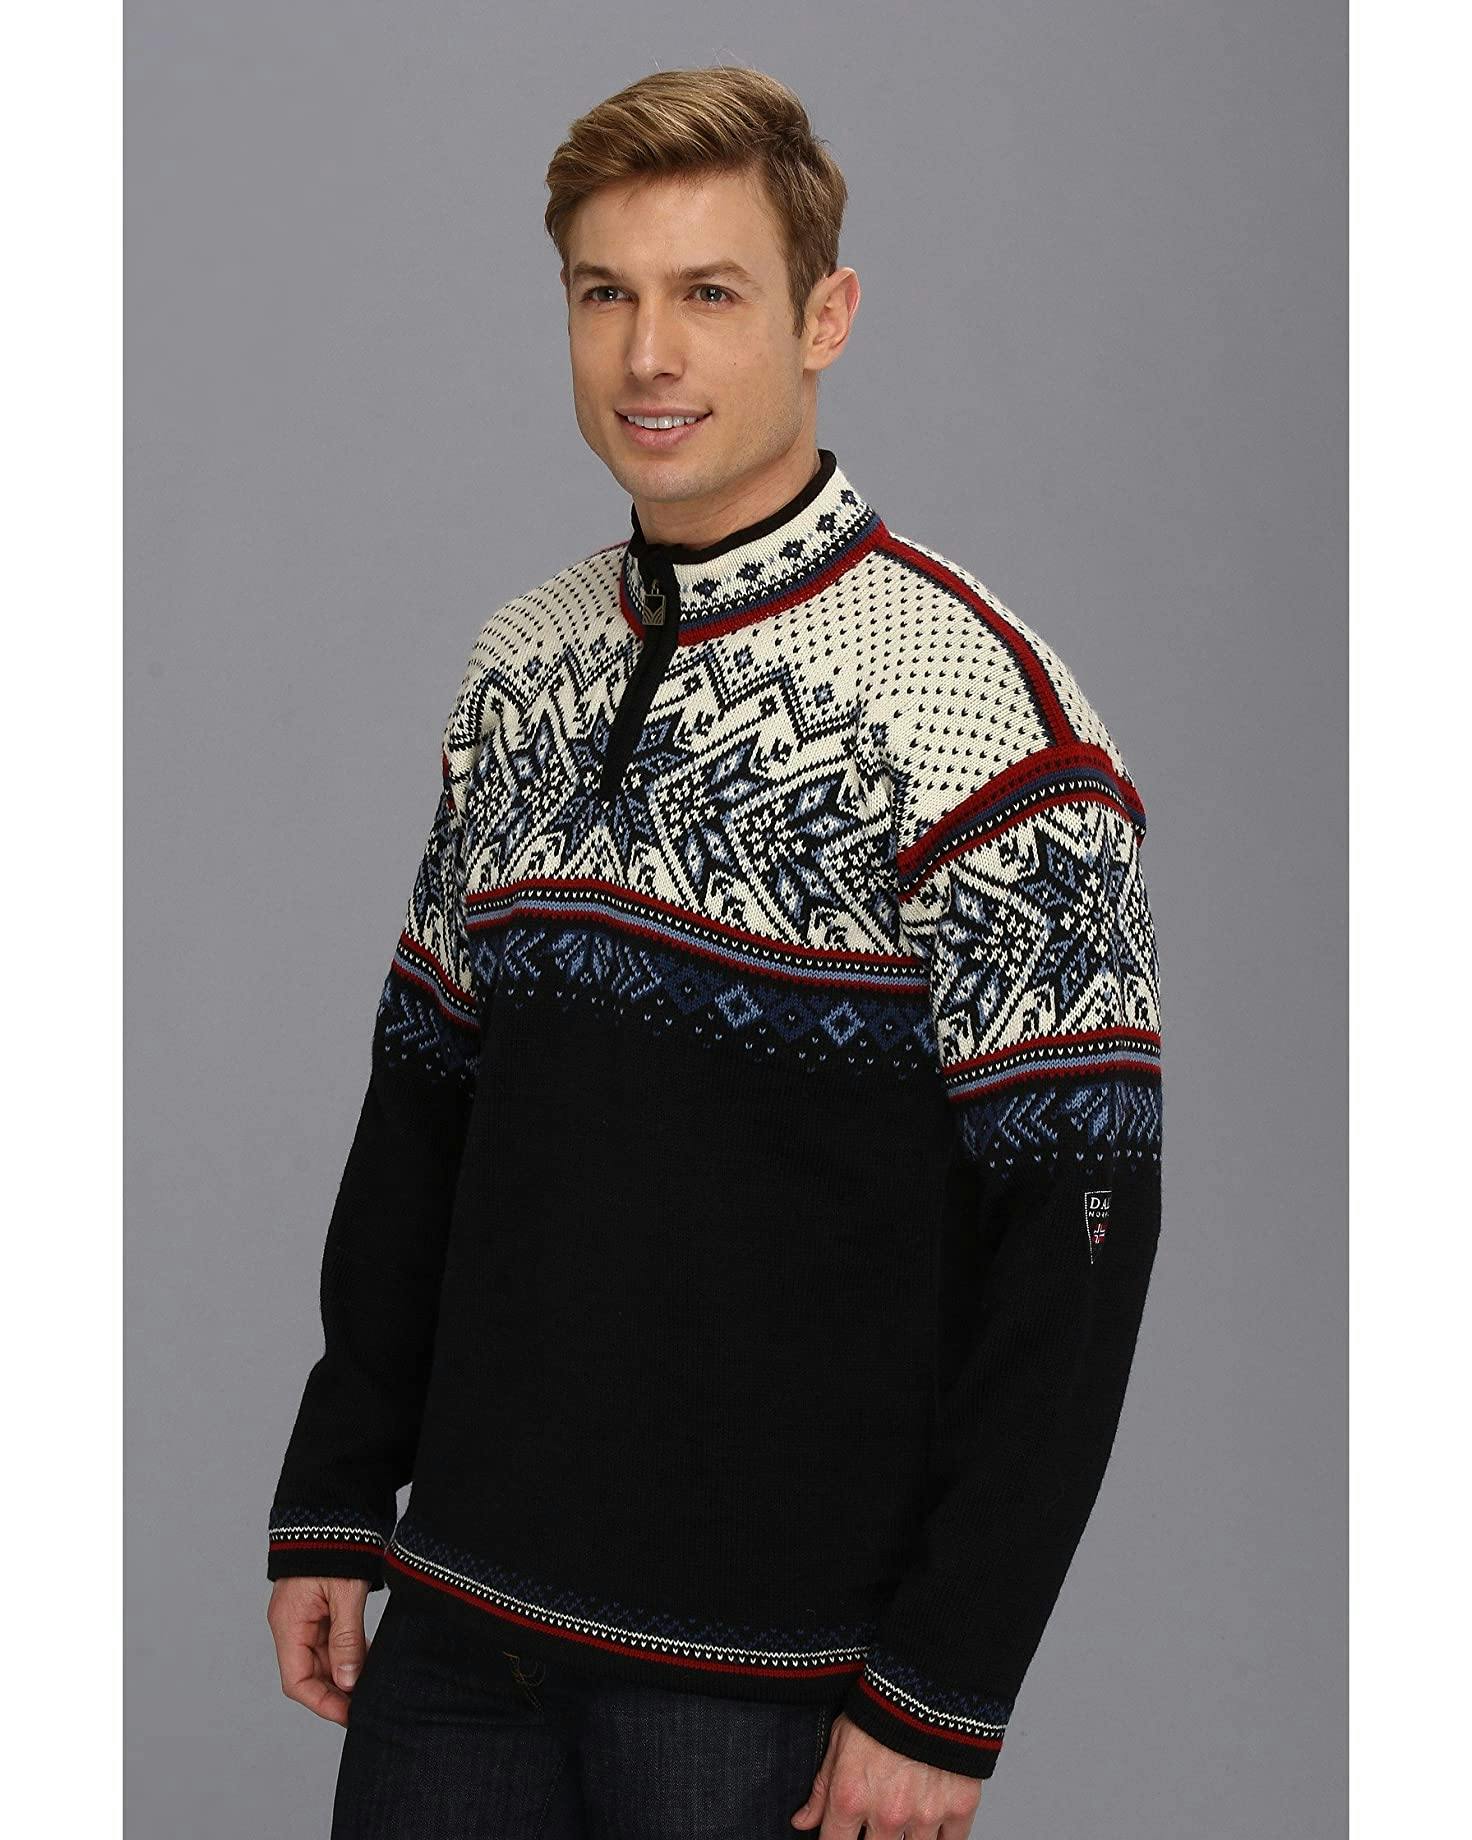 Dale of Norway Men's Vail Masc Sweater